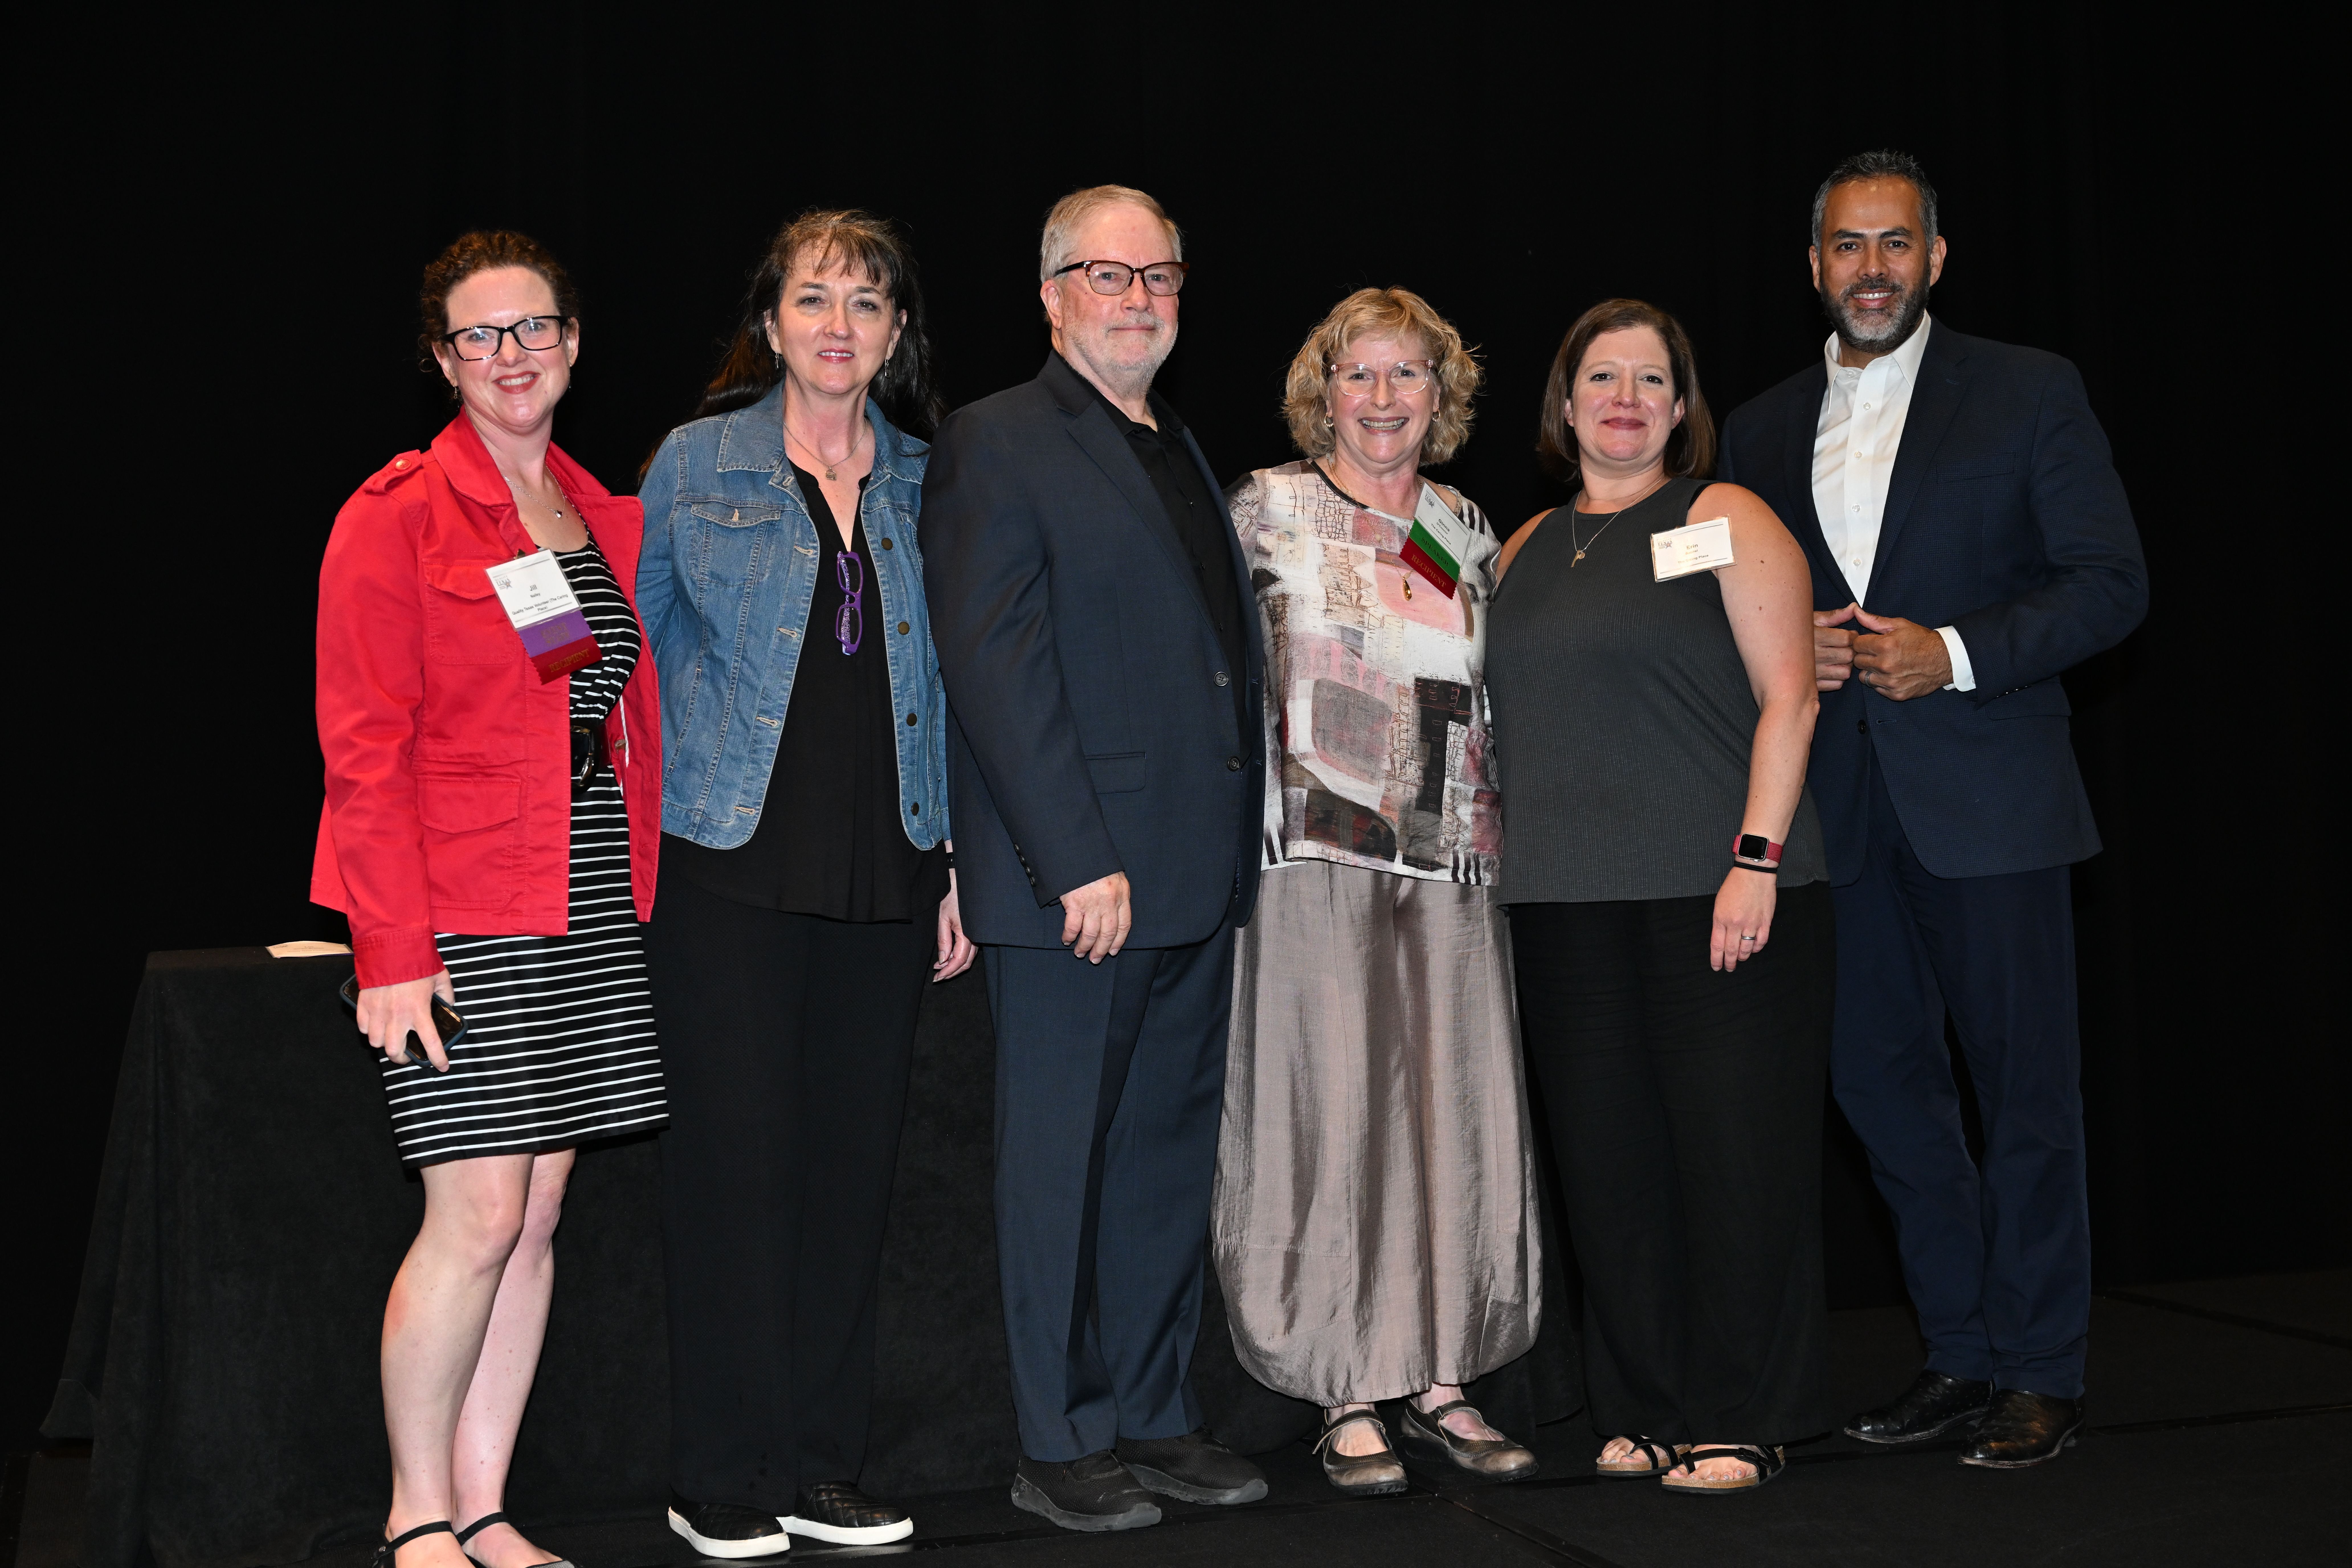 Quality Texas Foundation Regional Program Recognizes The Caring Place at Pioneer Level